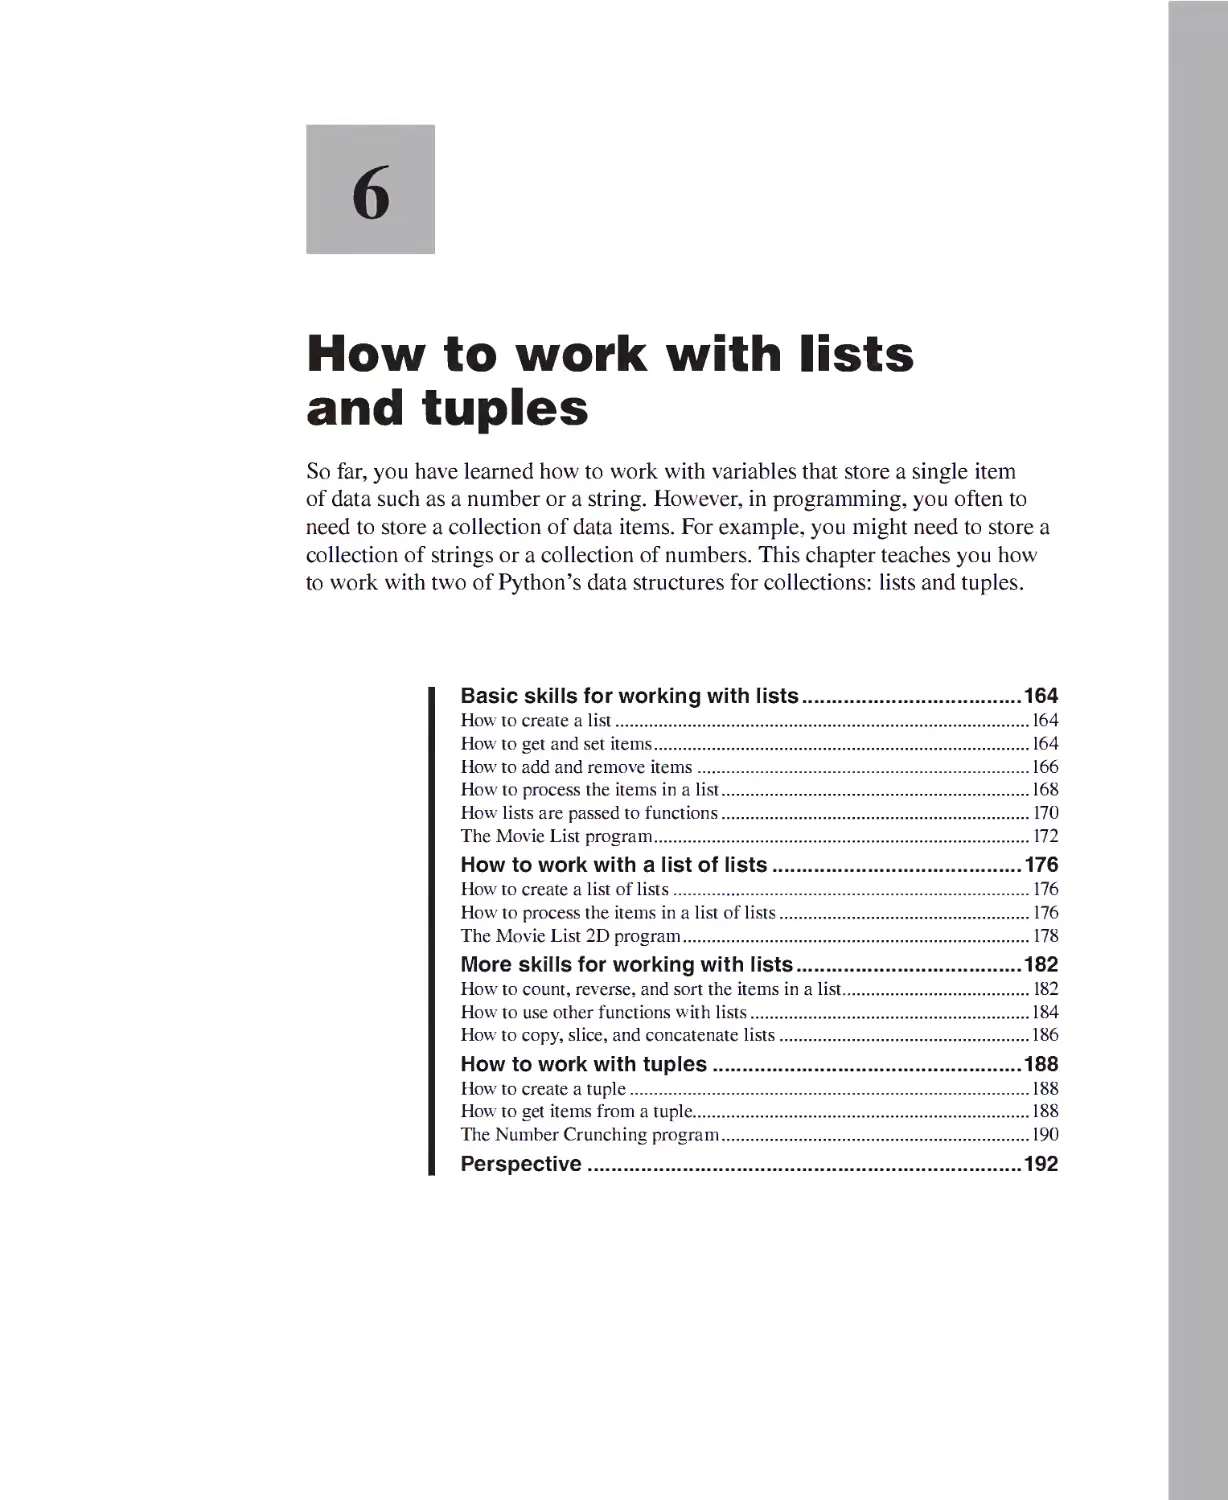 Chapter 6 - How to Work with Lists and Tuples